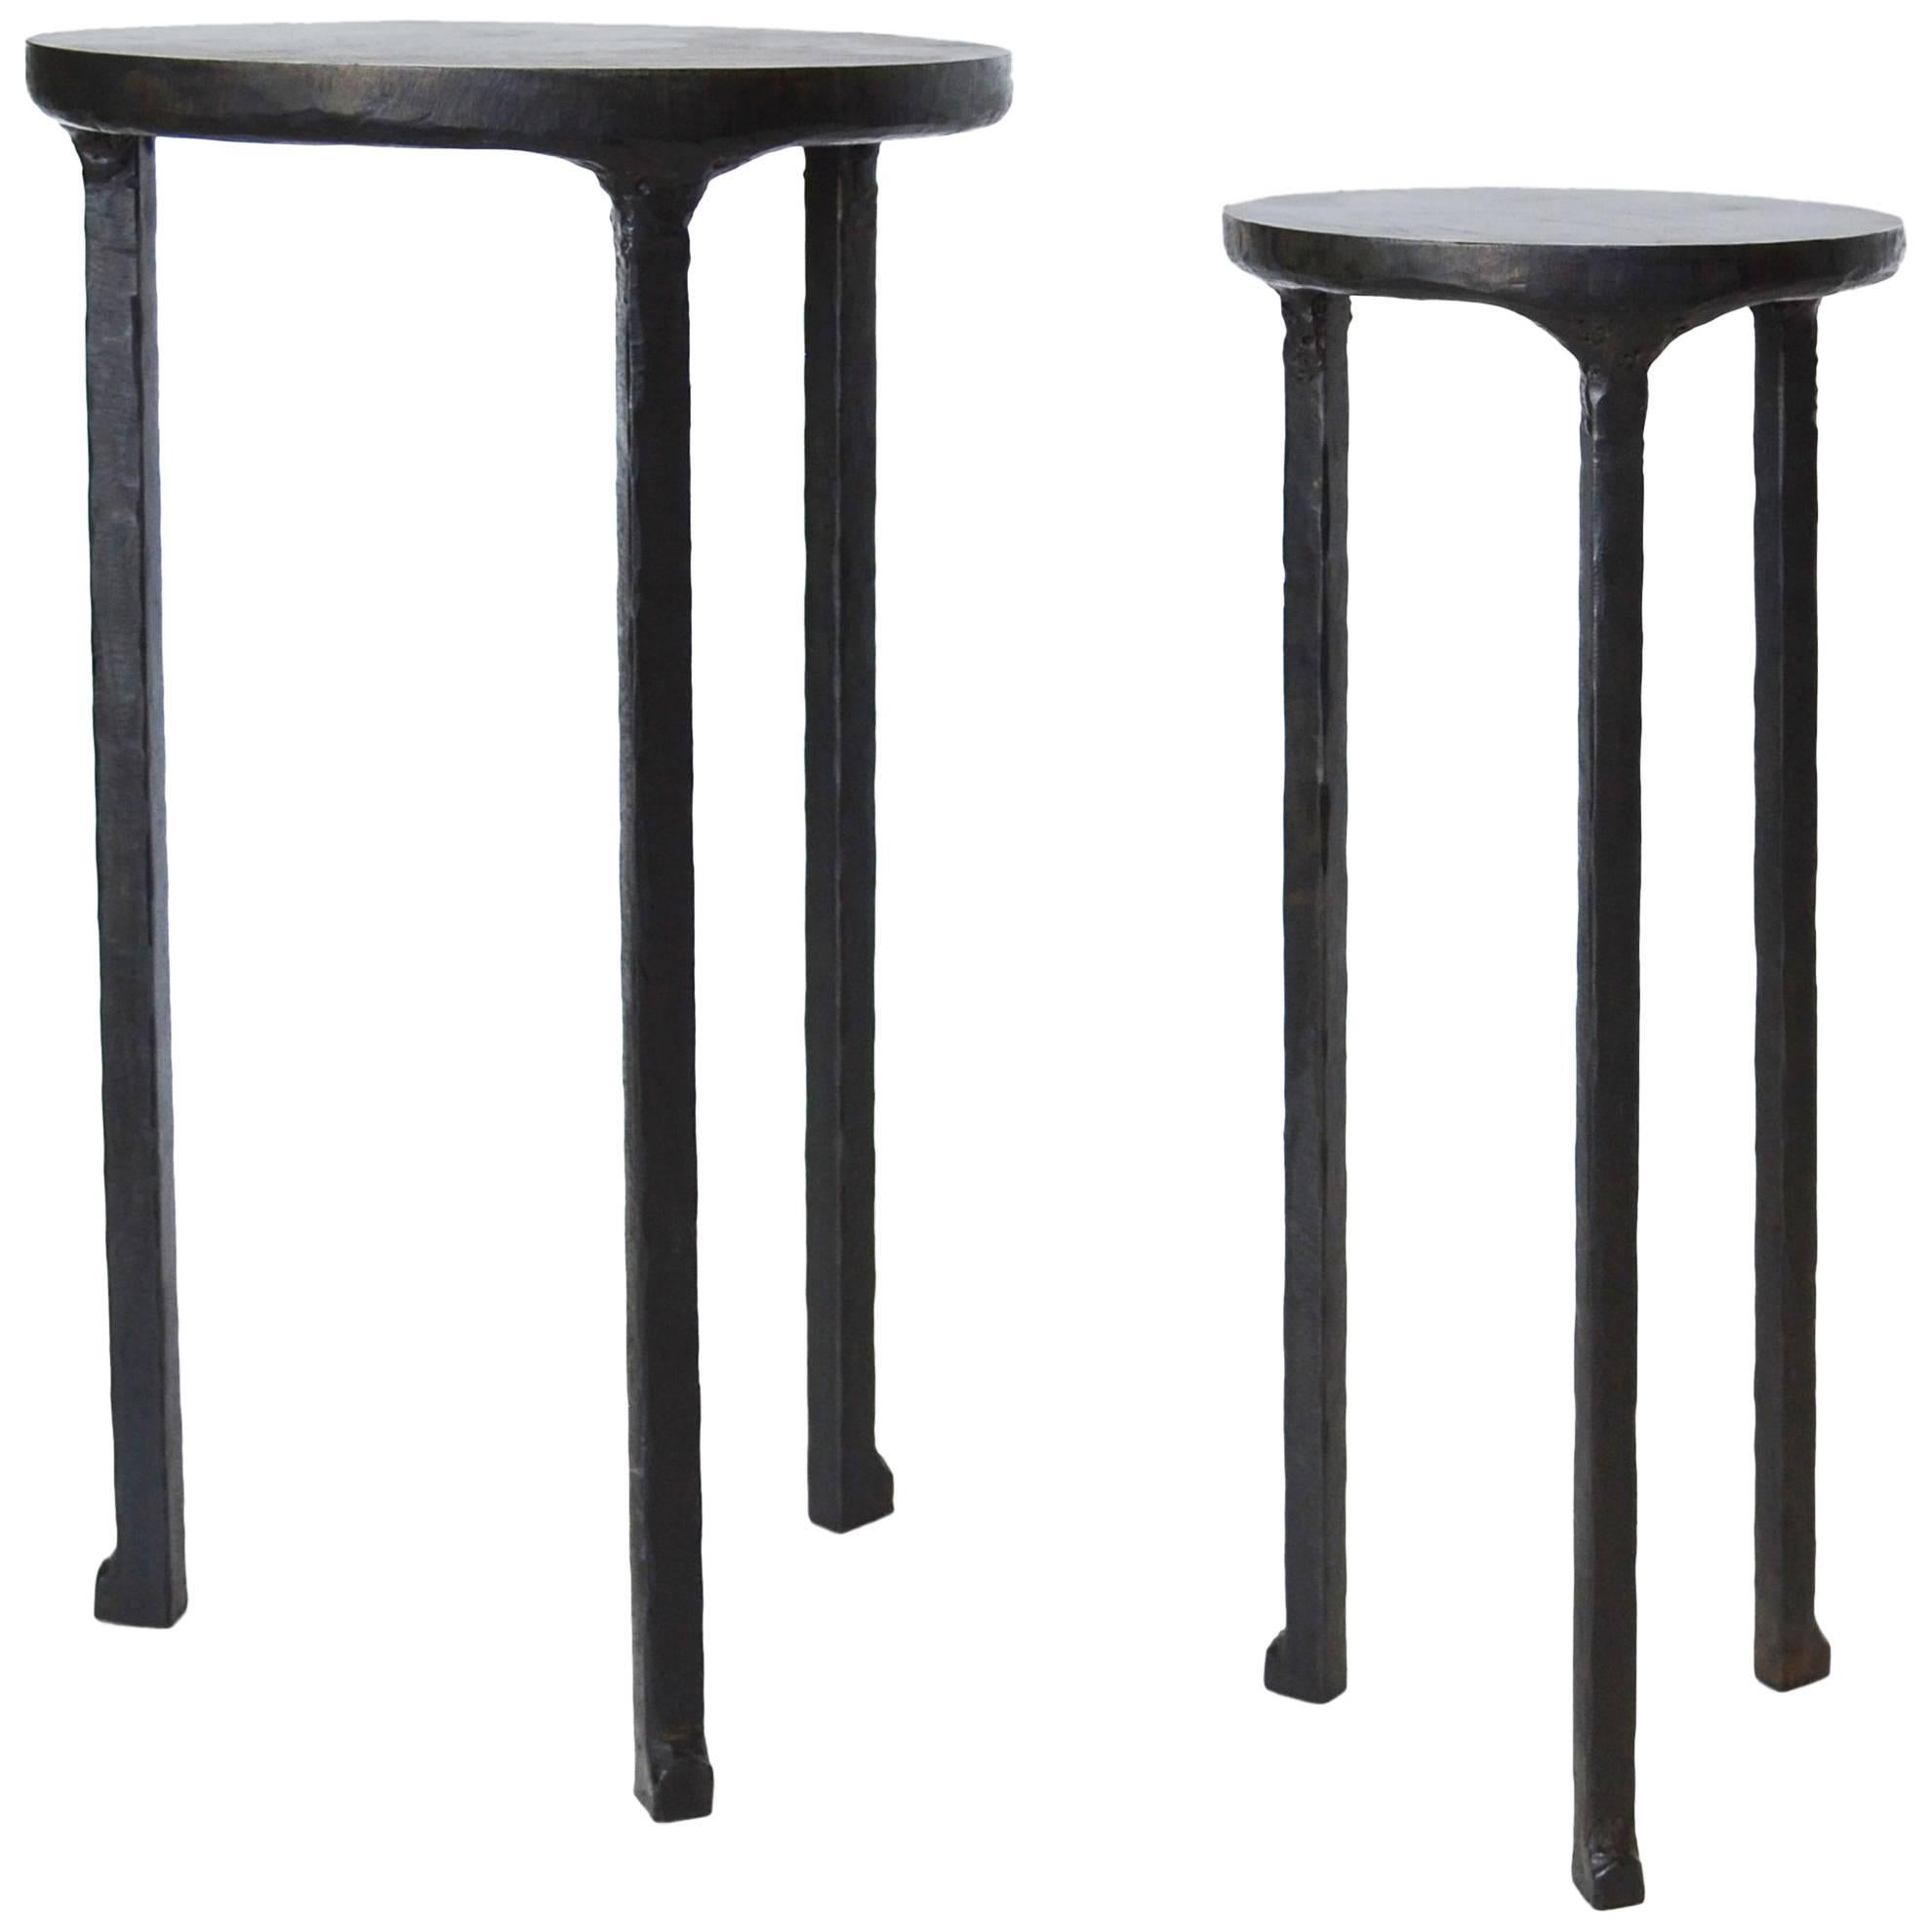 Cocktail Table Pair Modern Hand-Shaped Round Handmade Blackened and Waxed Steel 